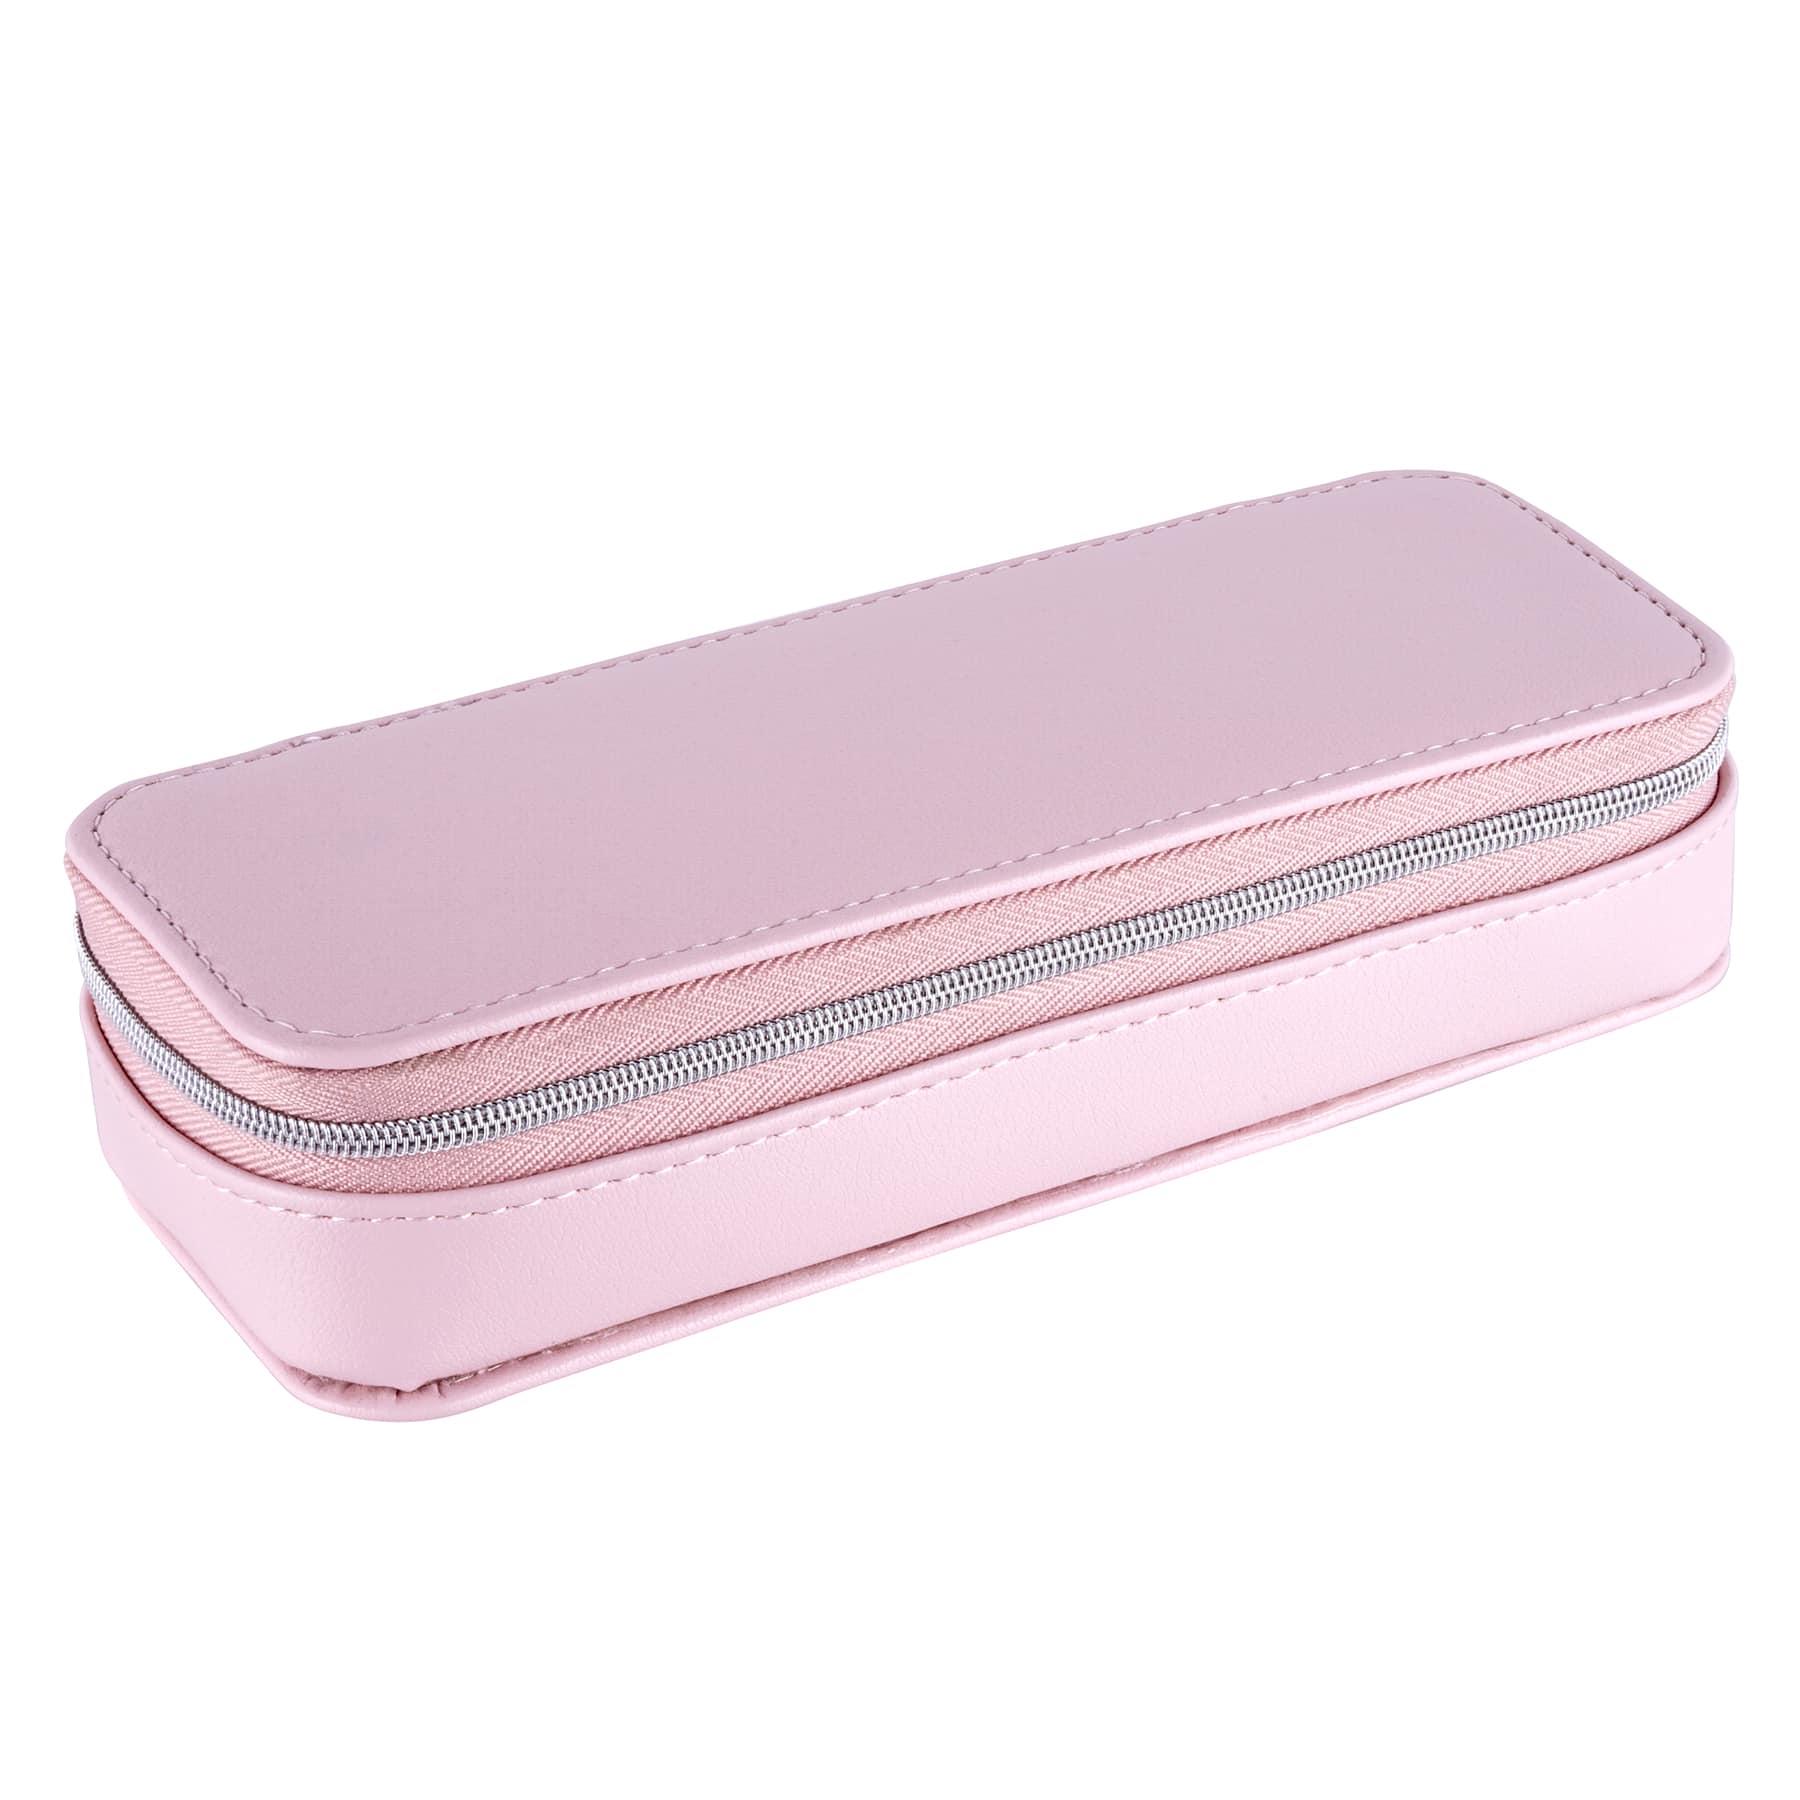 Plastic Pencil Box by Creatology in Blue | 7.97 x 5.43 x 2.02 | Michaels